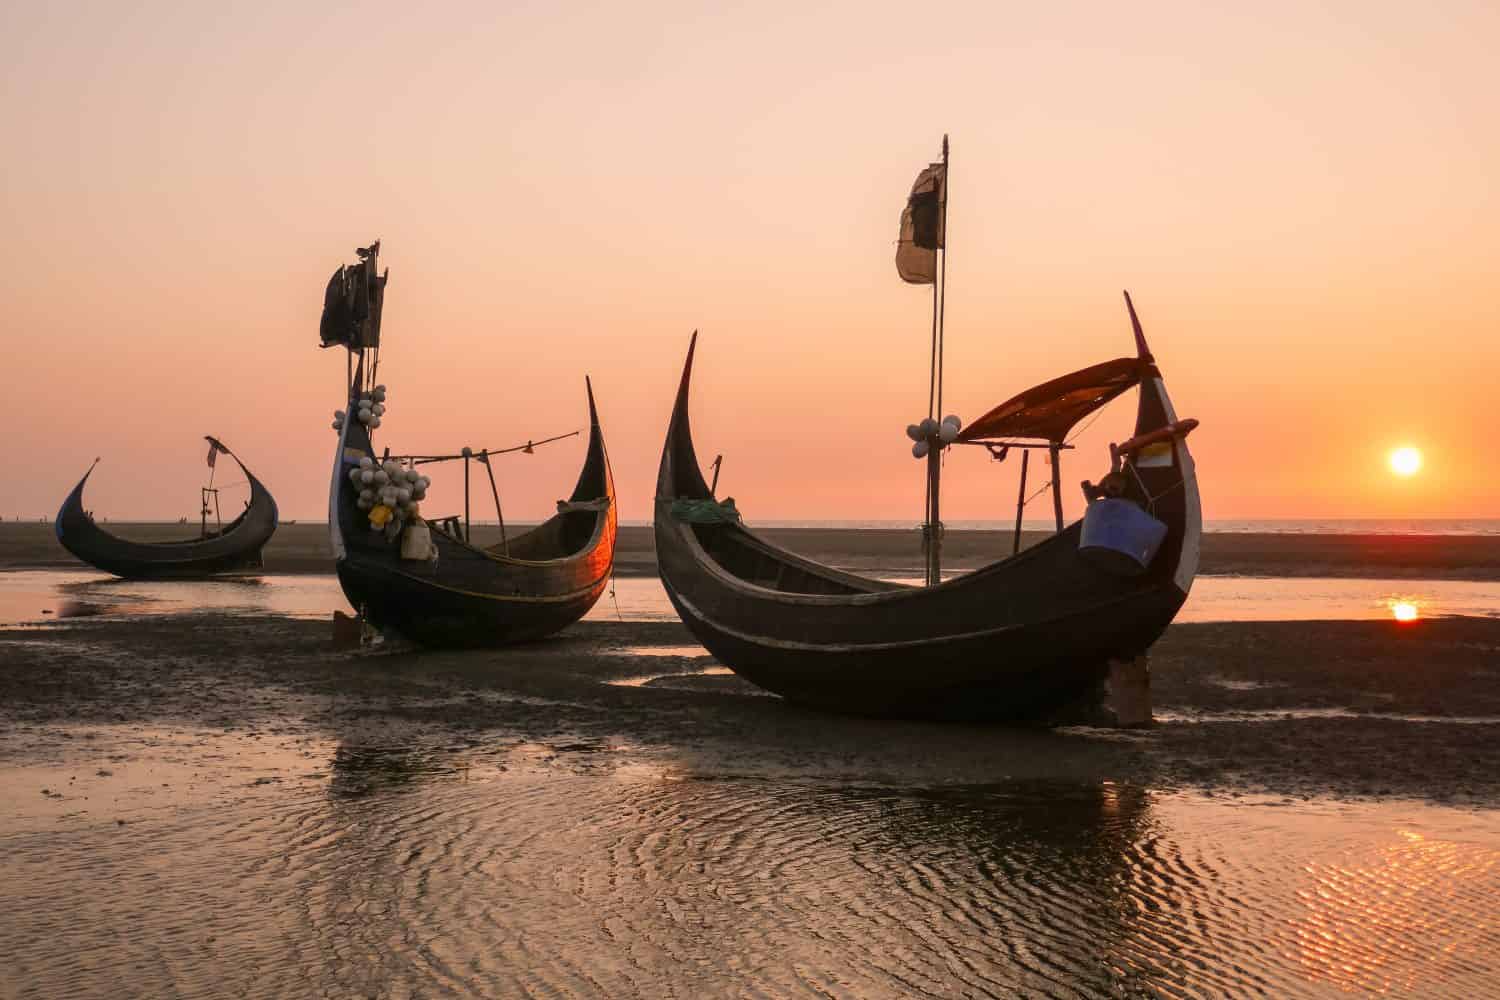 Sunset with beautiful traditional wooden fishing boats known as moon boats on beach near Cox's Bazar in southern Bangladesh	